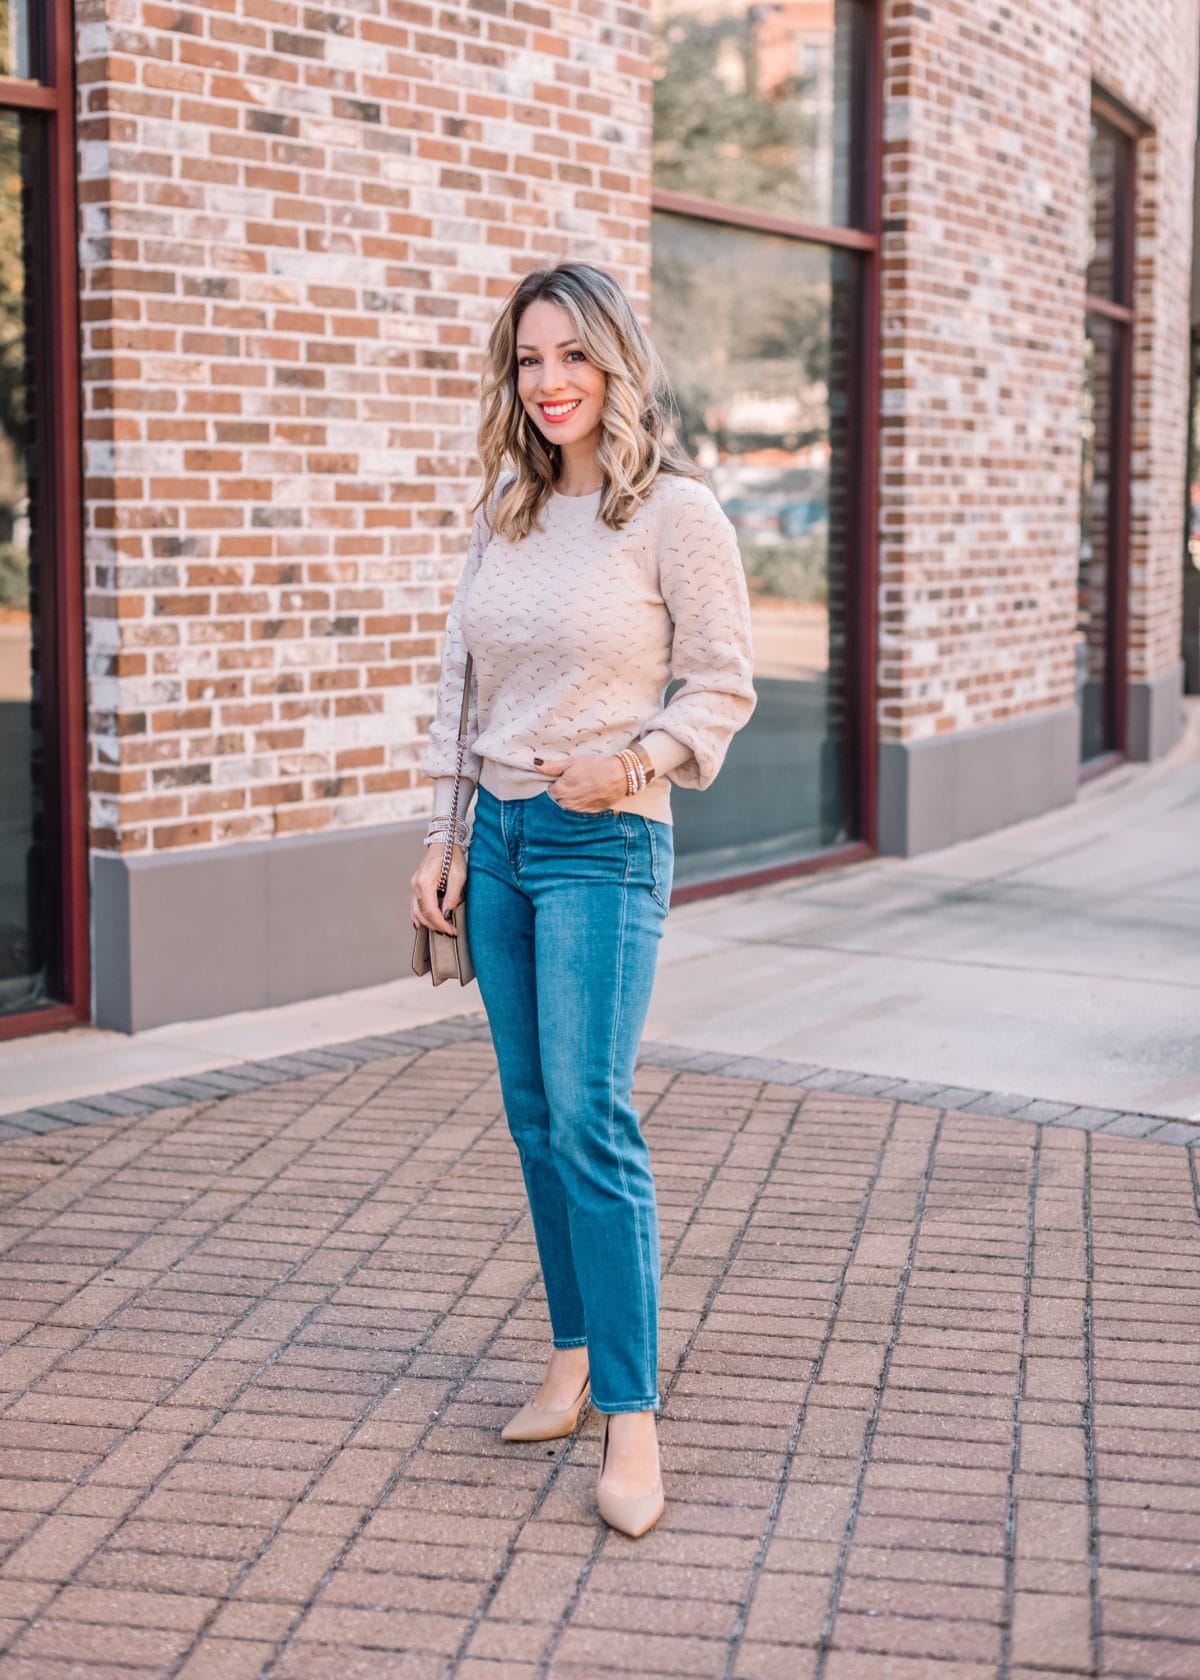 Express Fashion, Ponitnelle Sweater, Jeans, Nude Heels 